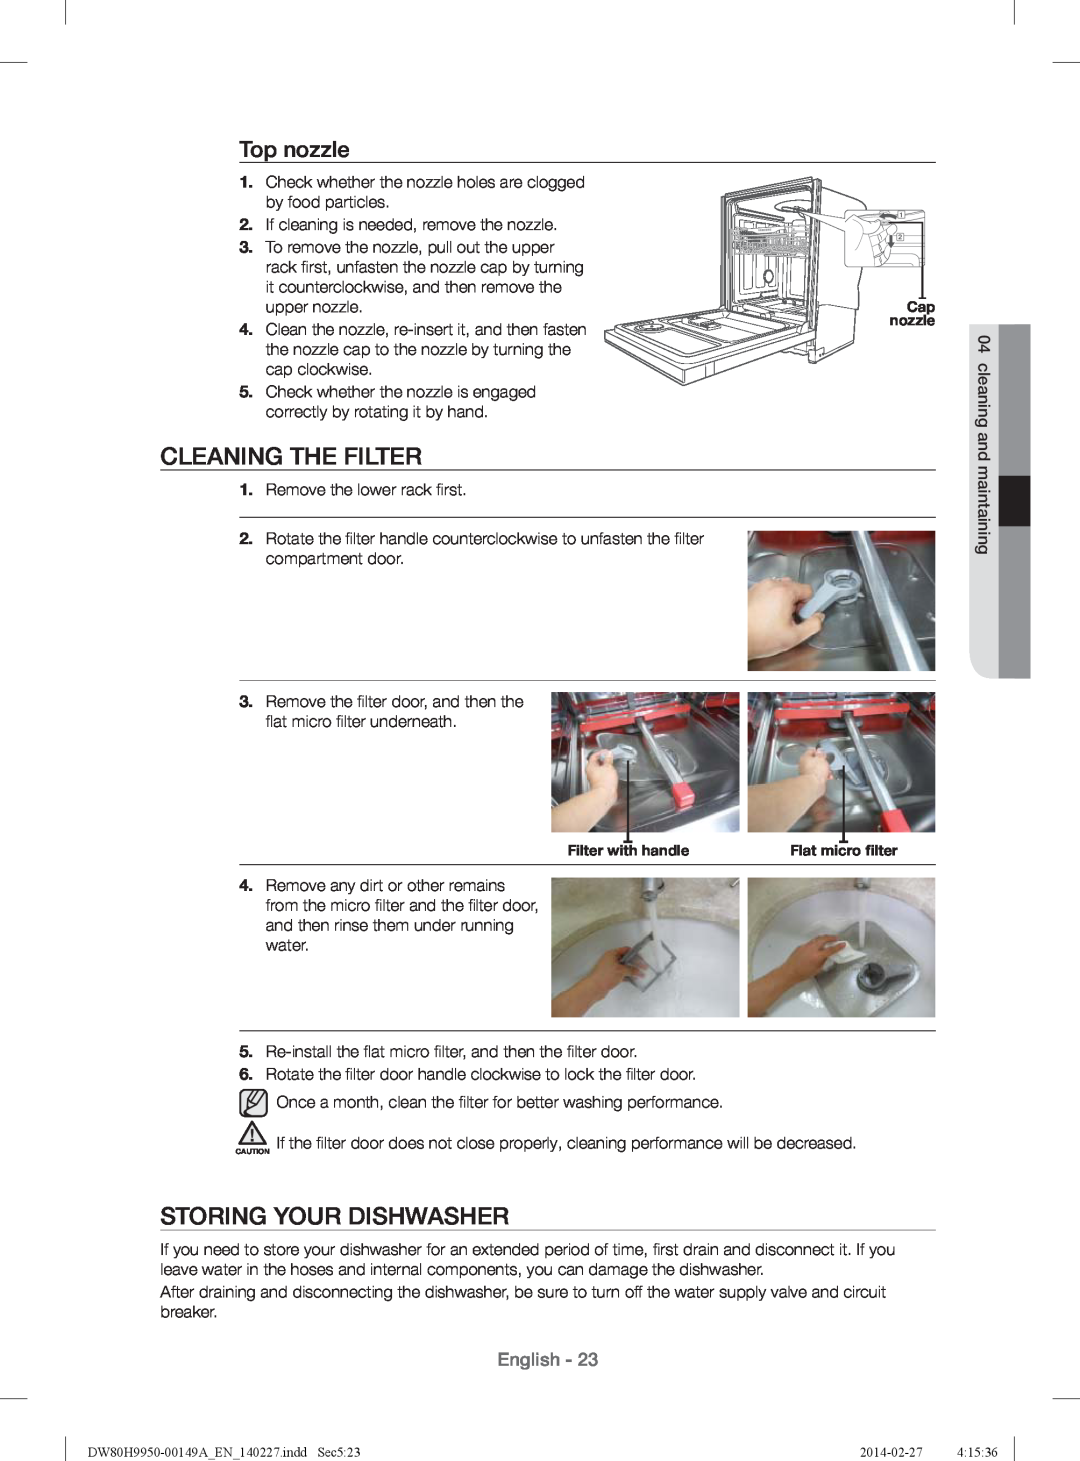 Samsung DW80H9930US user manual Cleaning The Filter, Storing Your Dishwasher, Top nozzle, English 